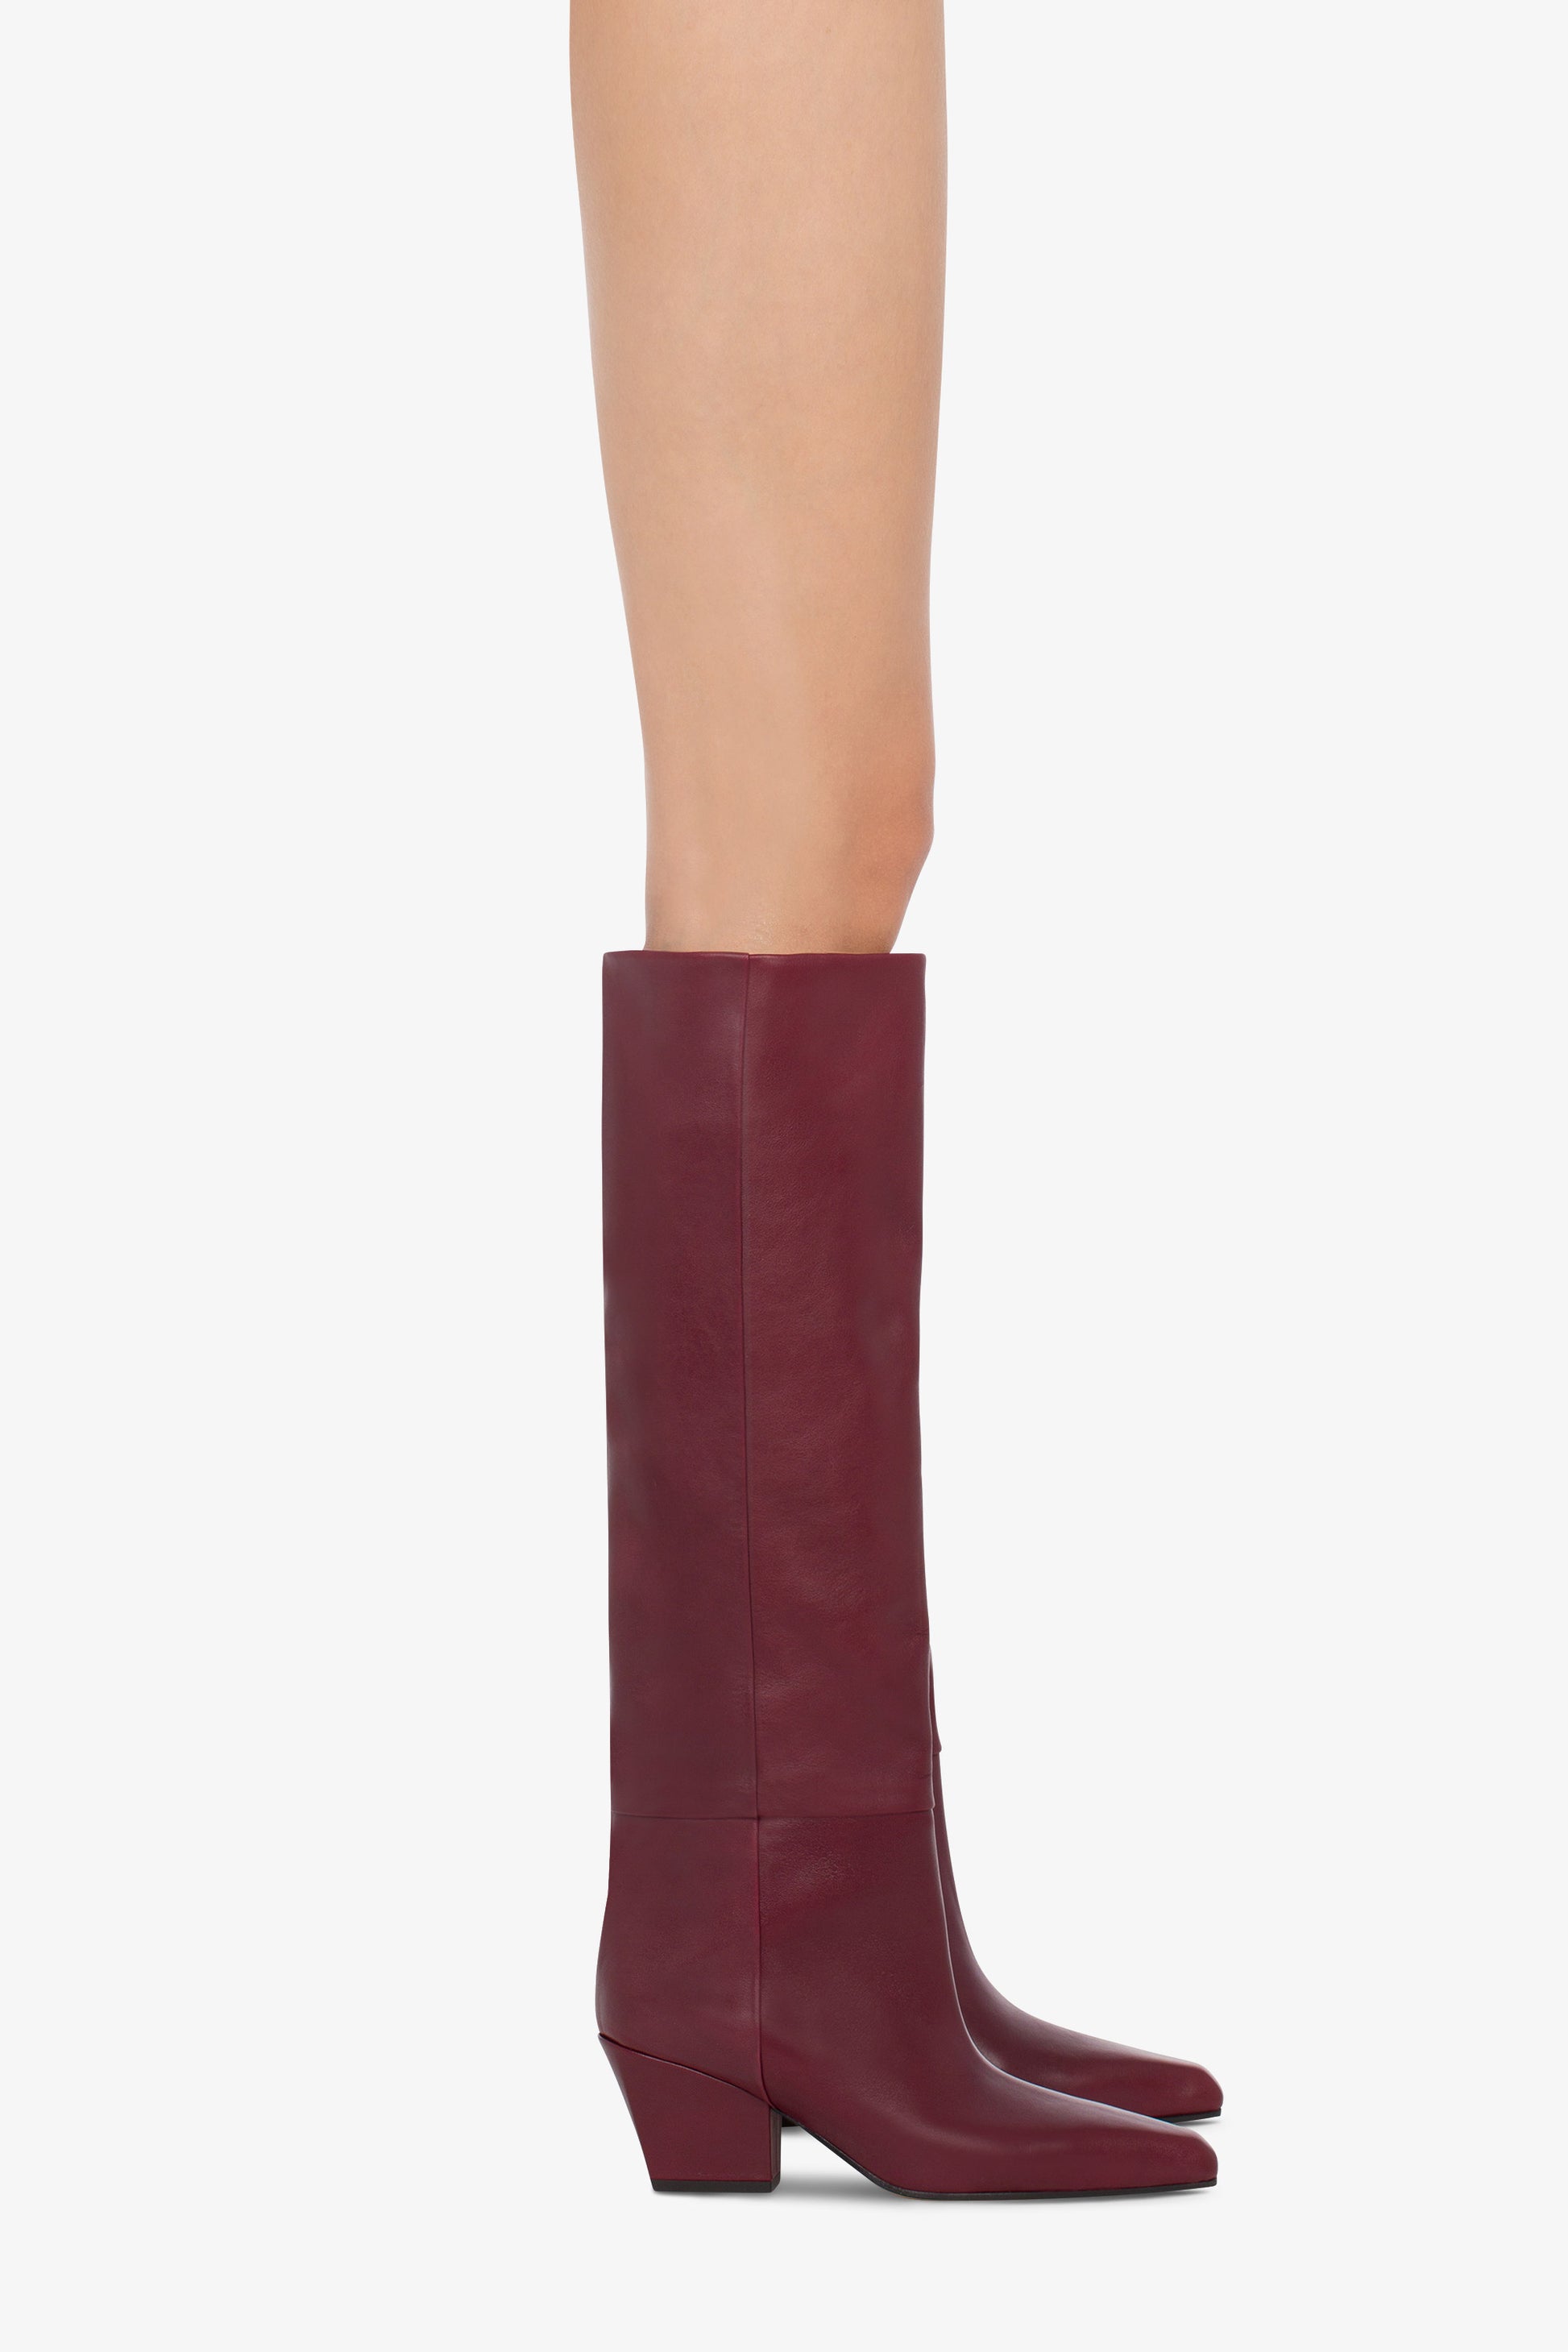 Knee-high, long pointed boot in supple rouge noir leather - Product worn